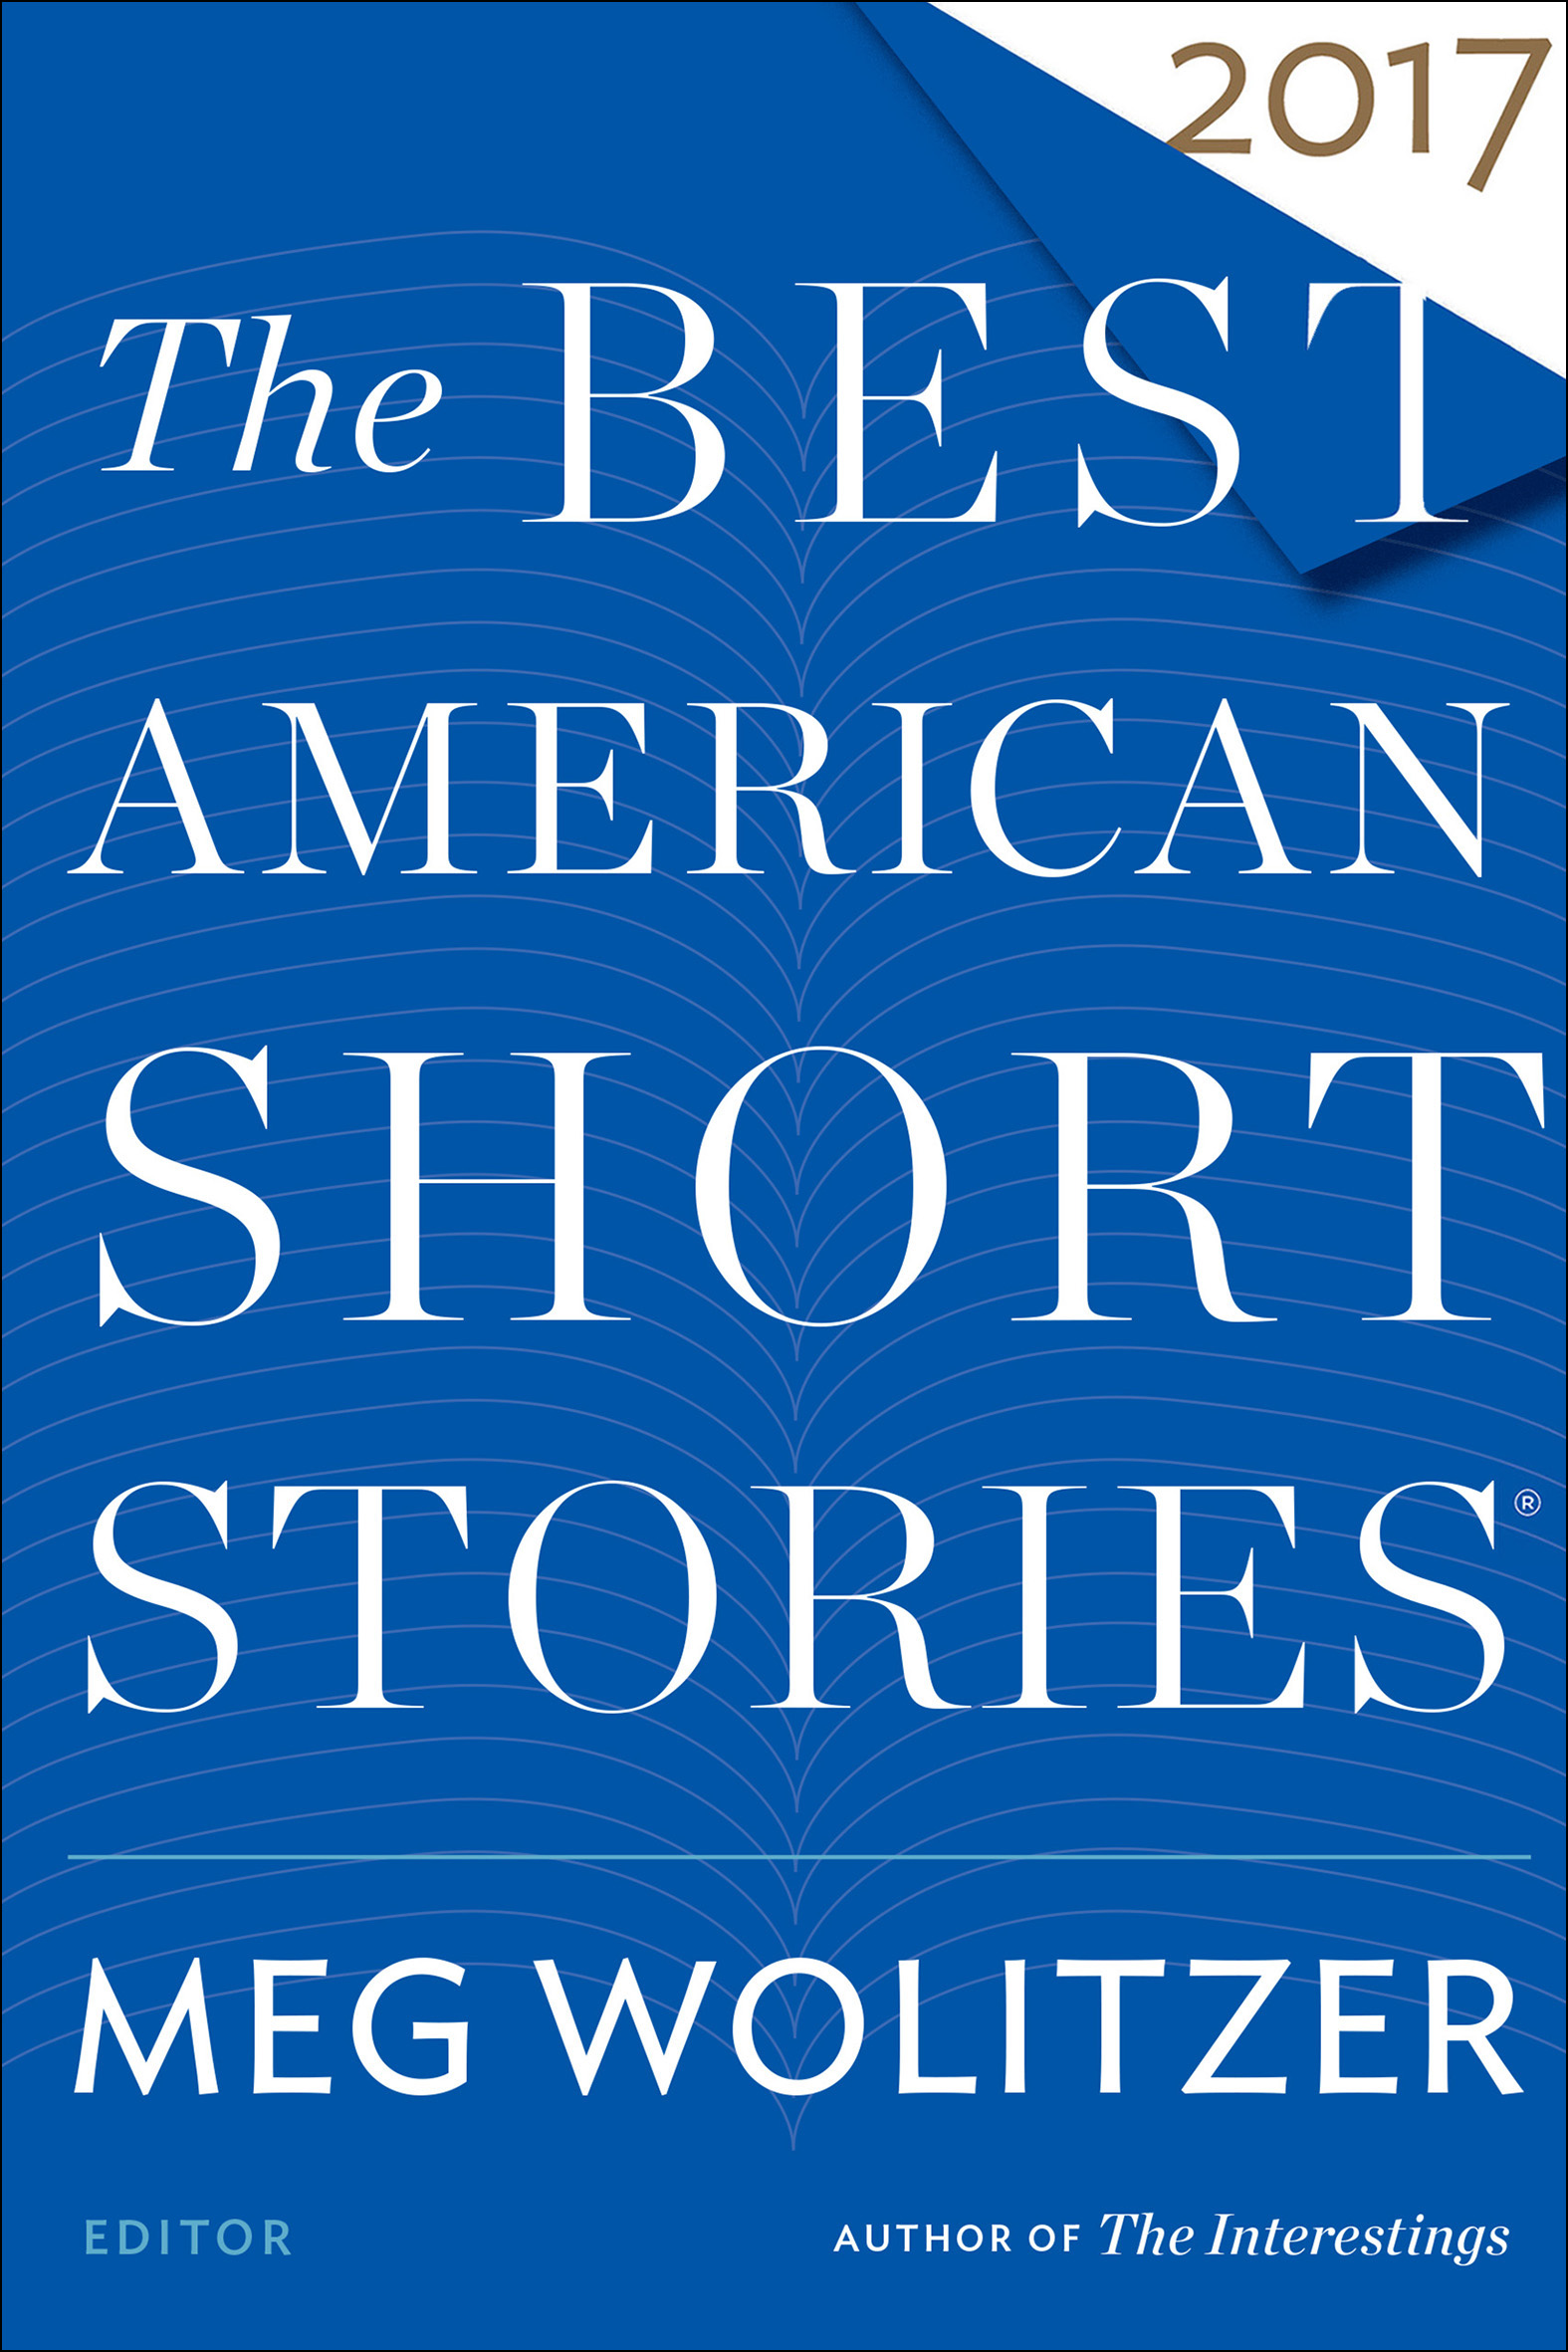 The best American short stories 2017 cover image